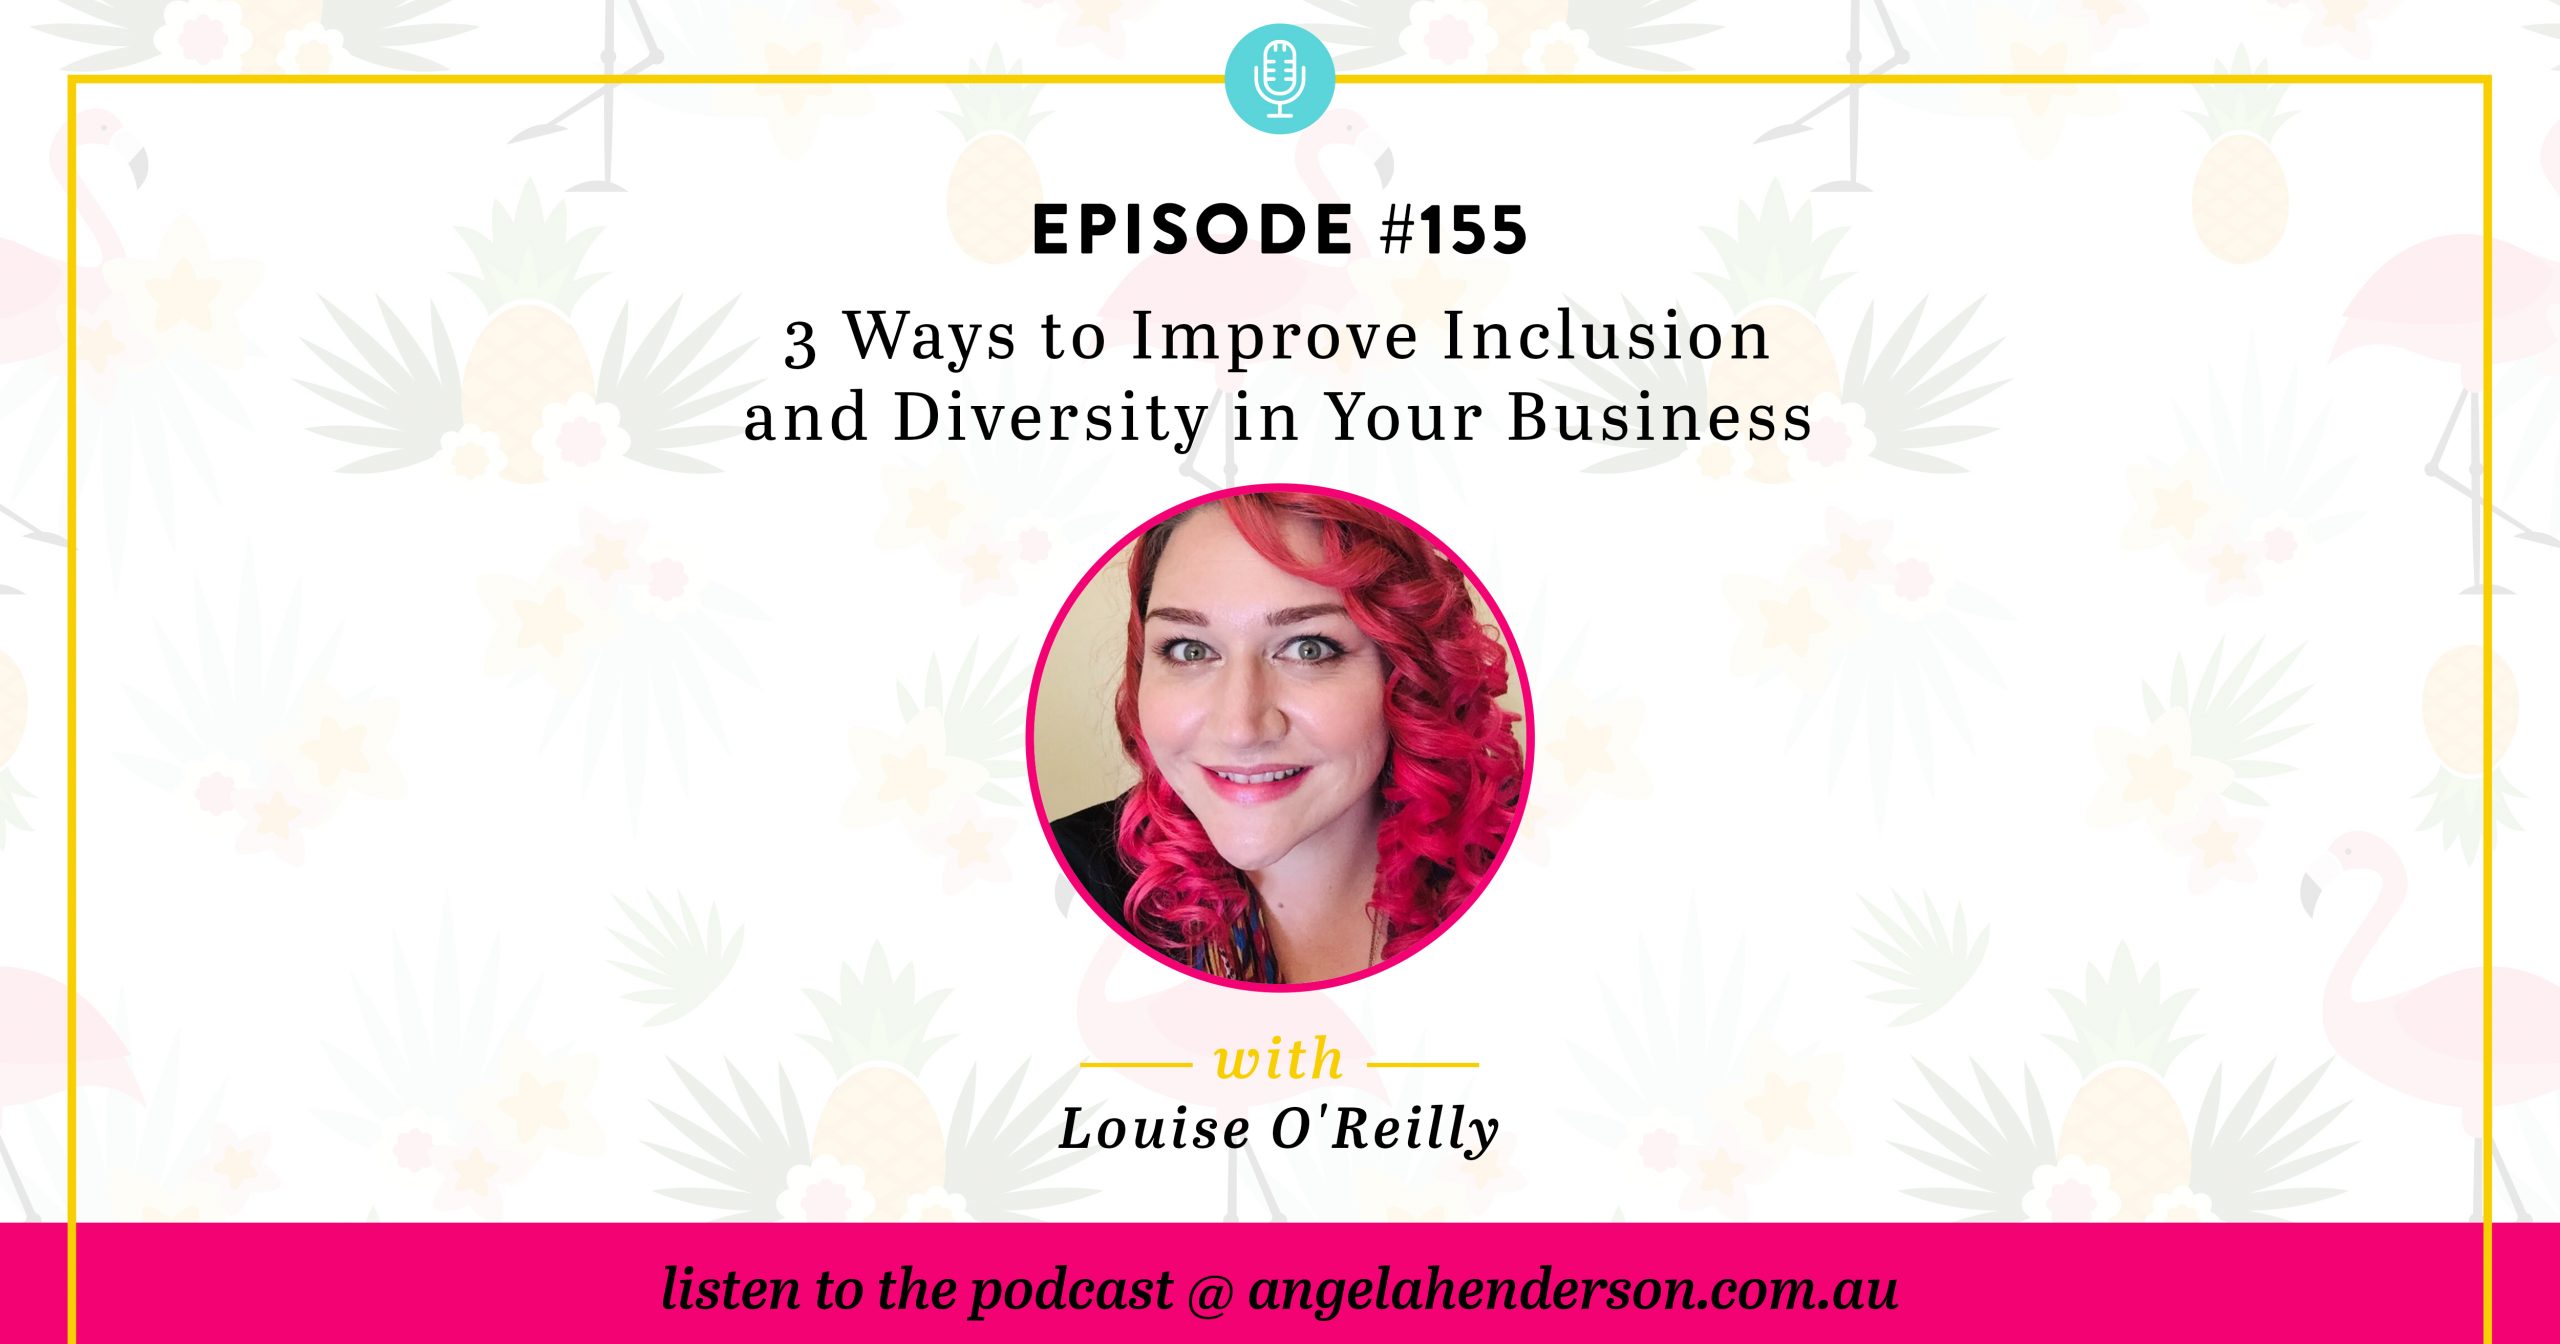 Ways to Improve Inclusion and Diversity in Your Business